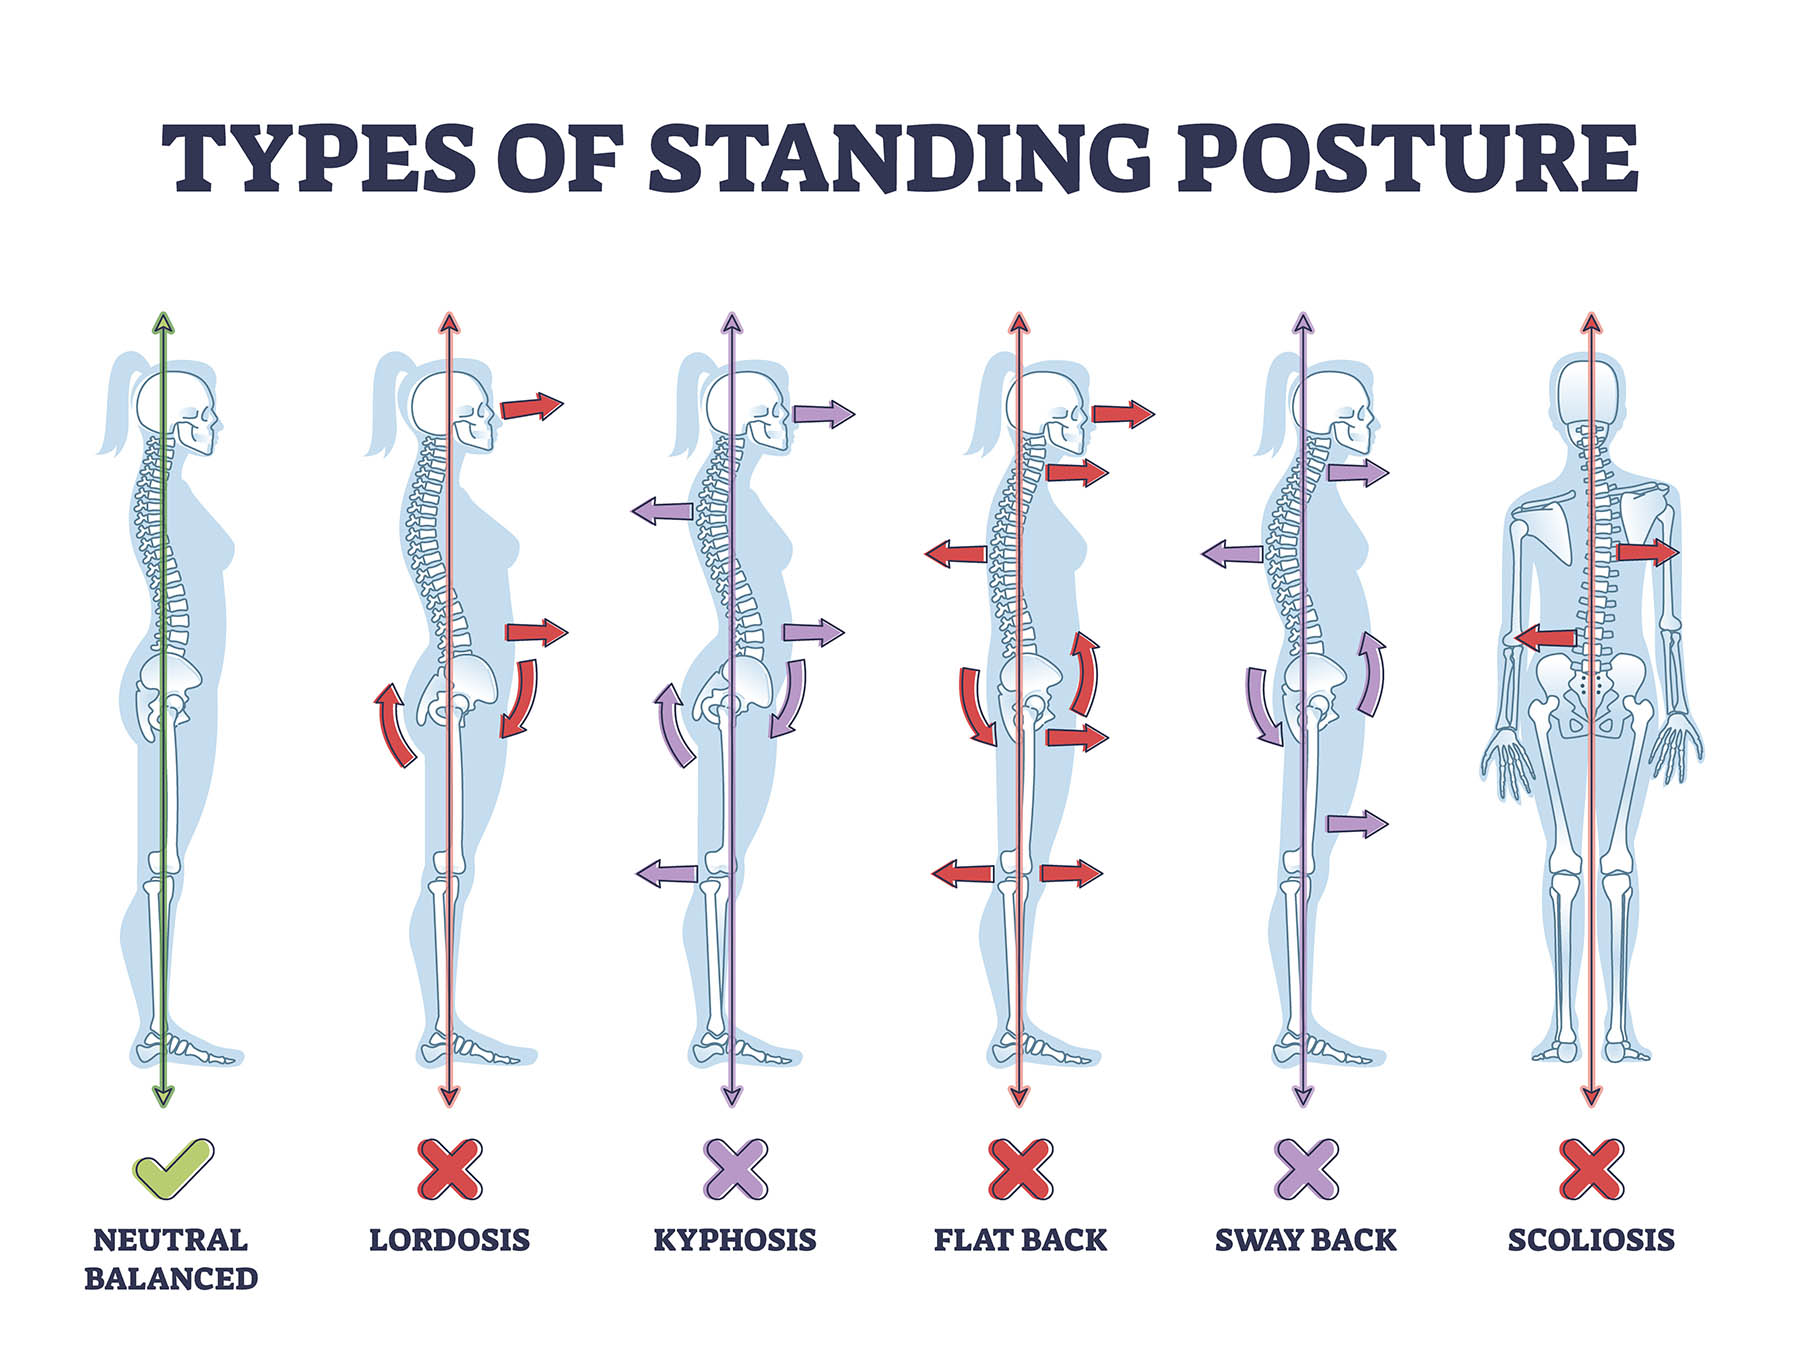 Importance of Posture in Lifting and Everyday Life.